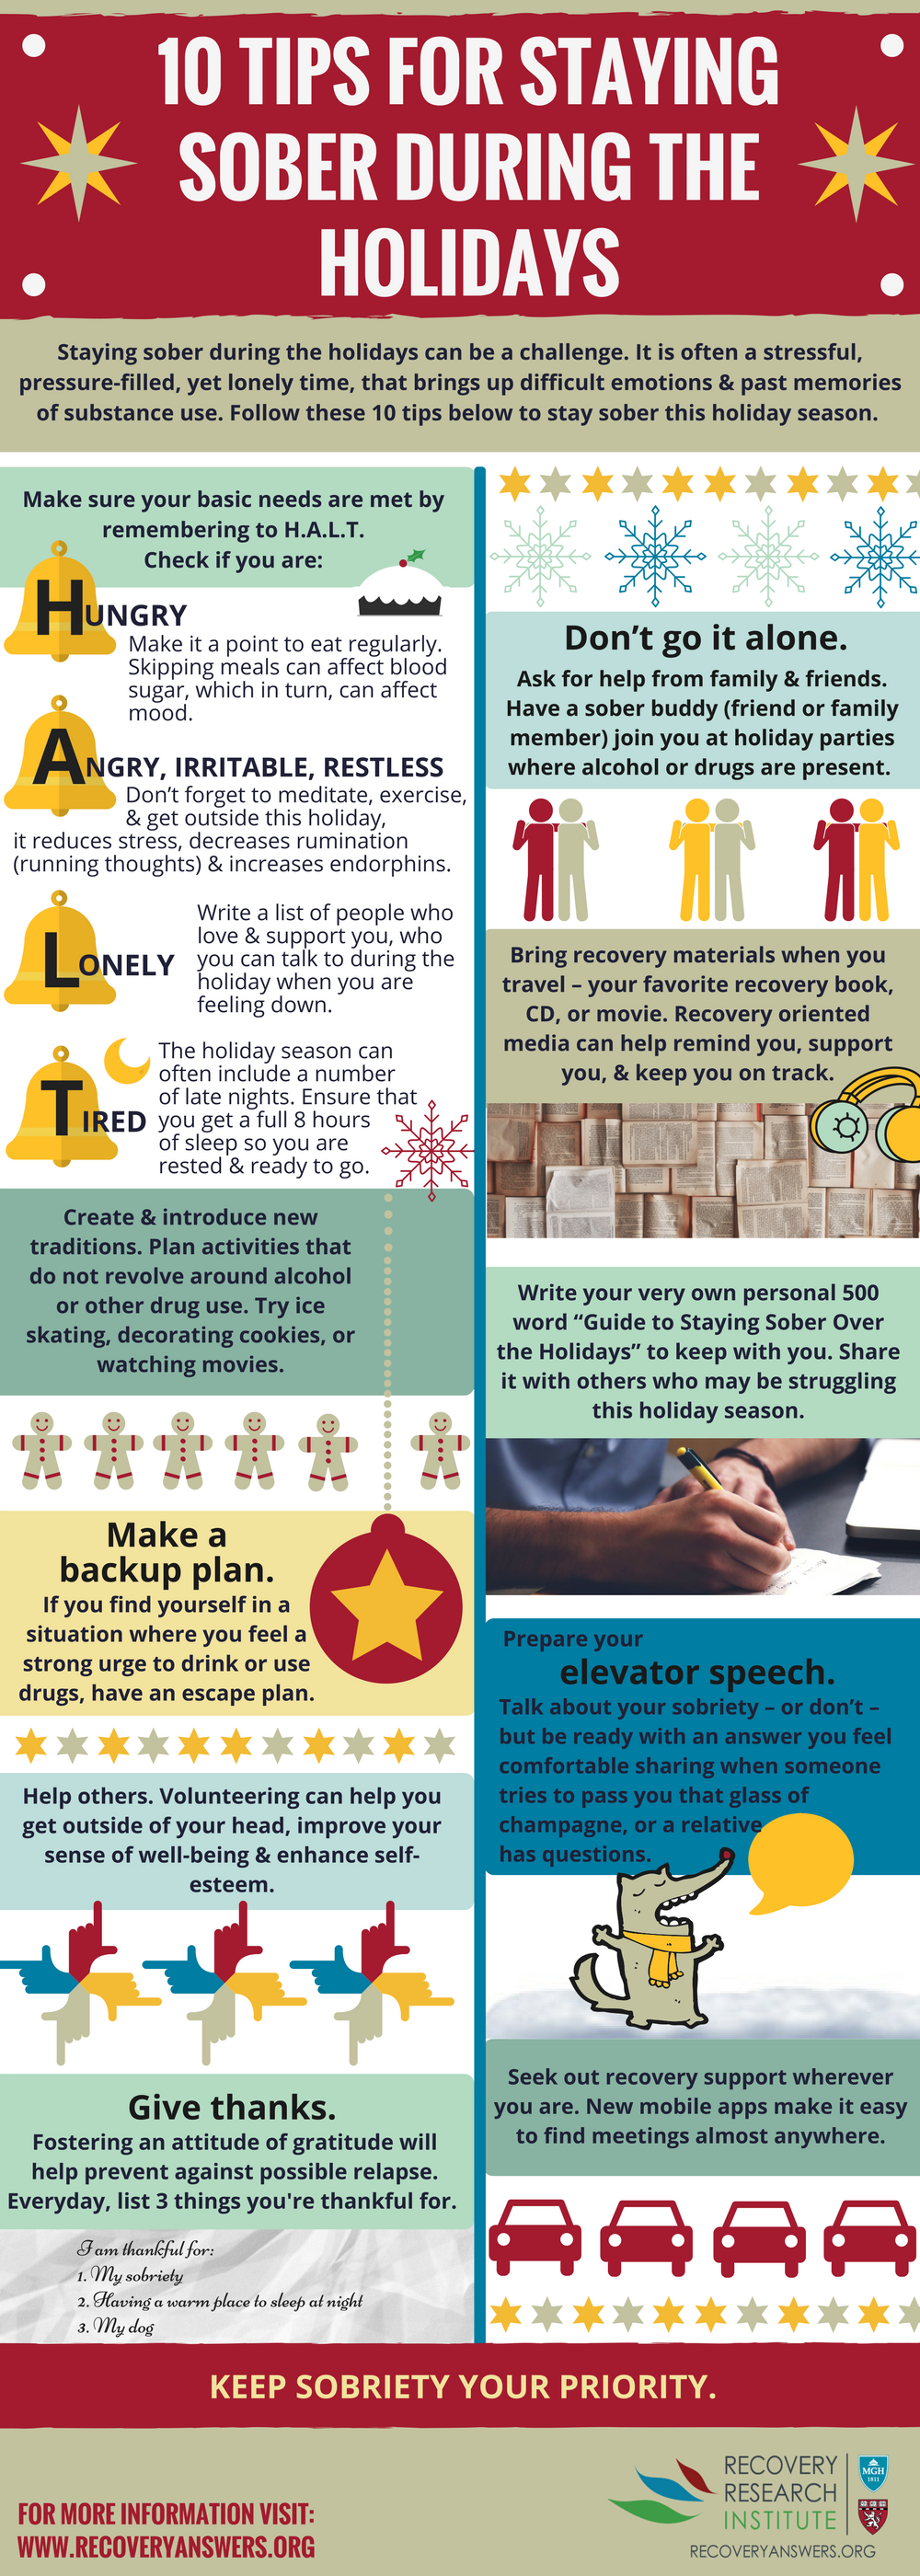 Holiday Sobriety - Ways to Stay Sober